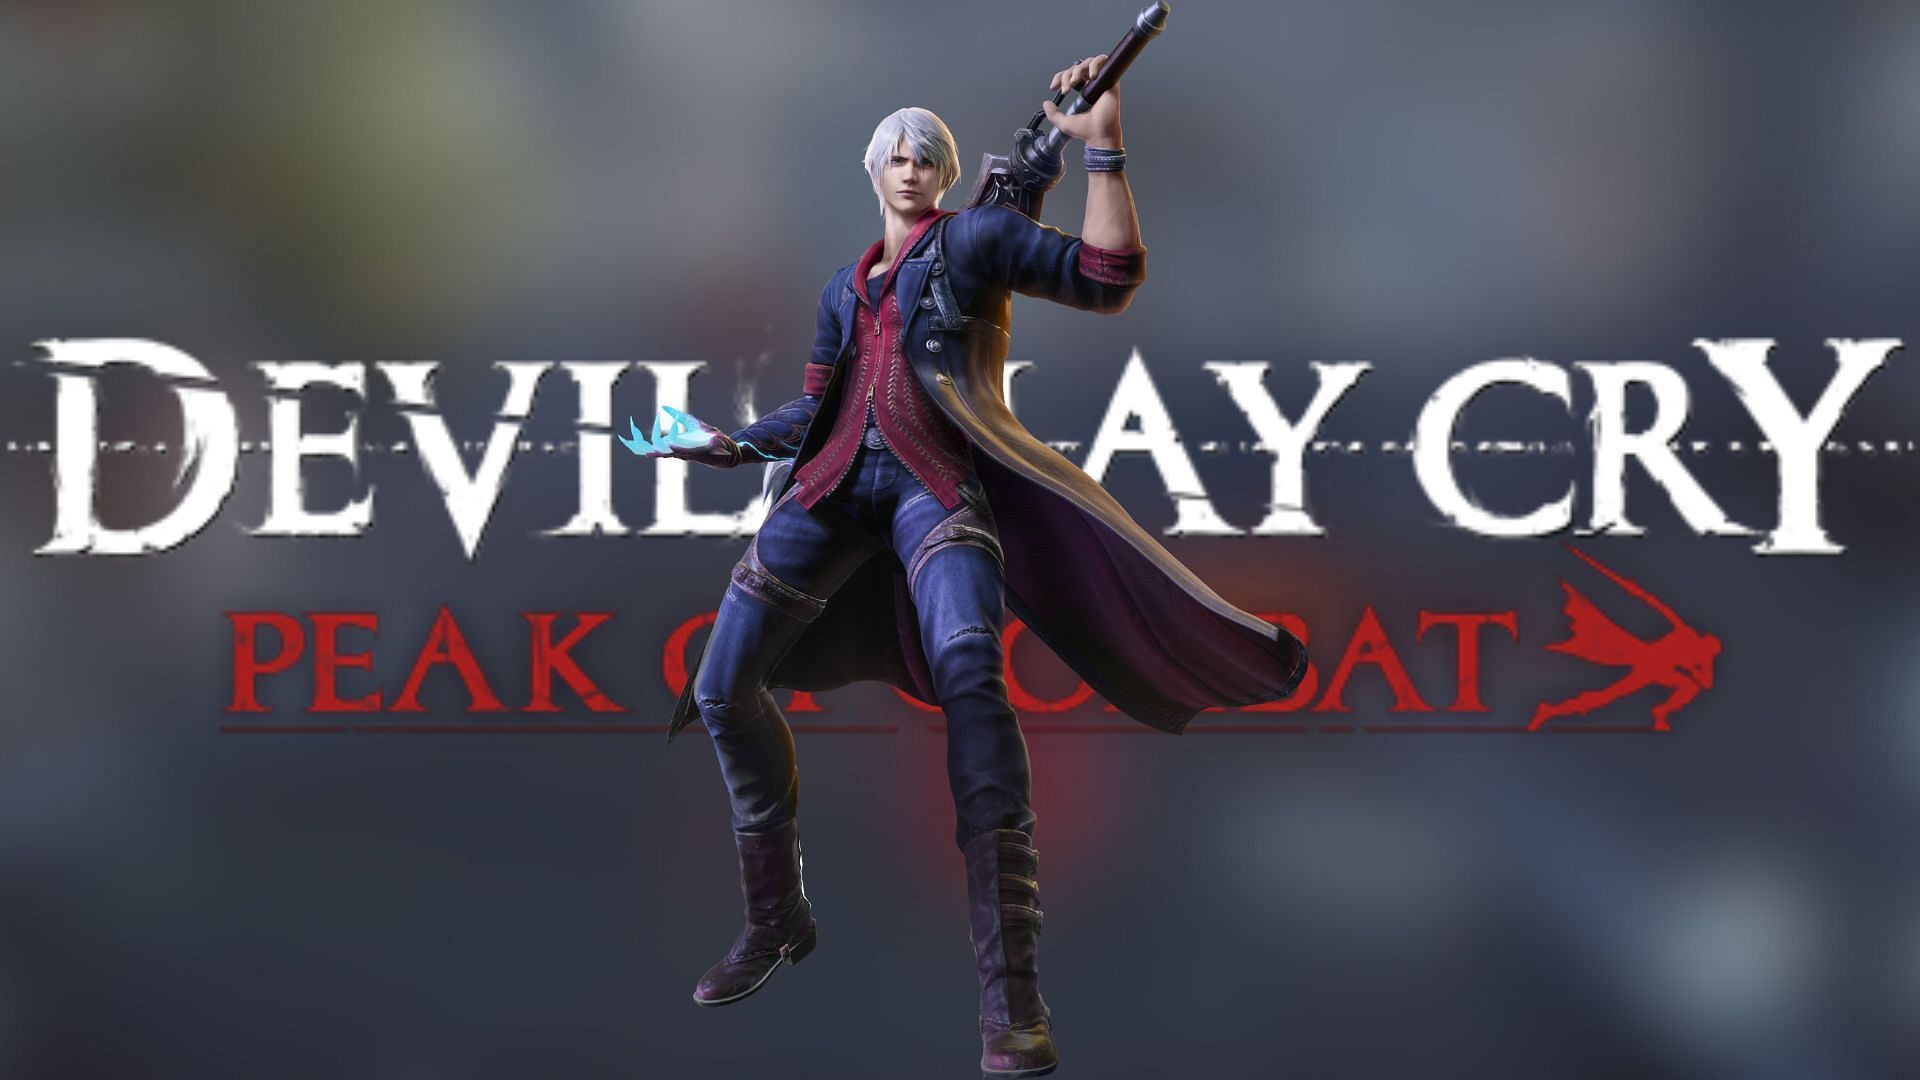 Devil May Cry: Peak of Combat Official Website - Made by NebulaJoy